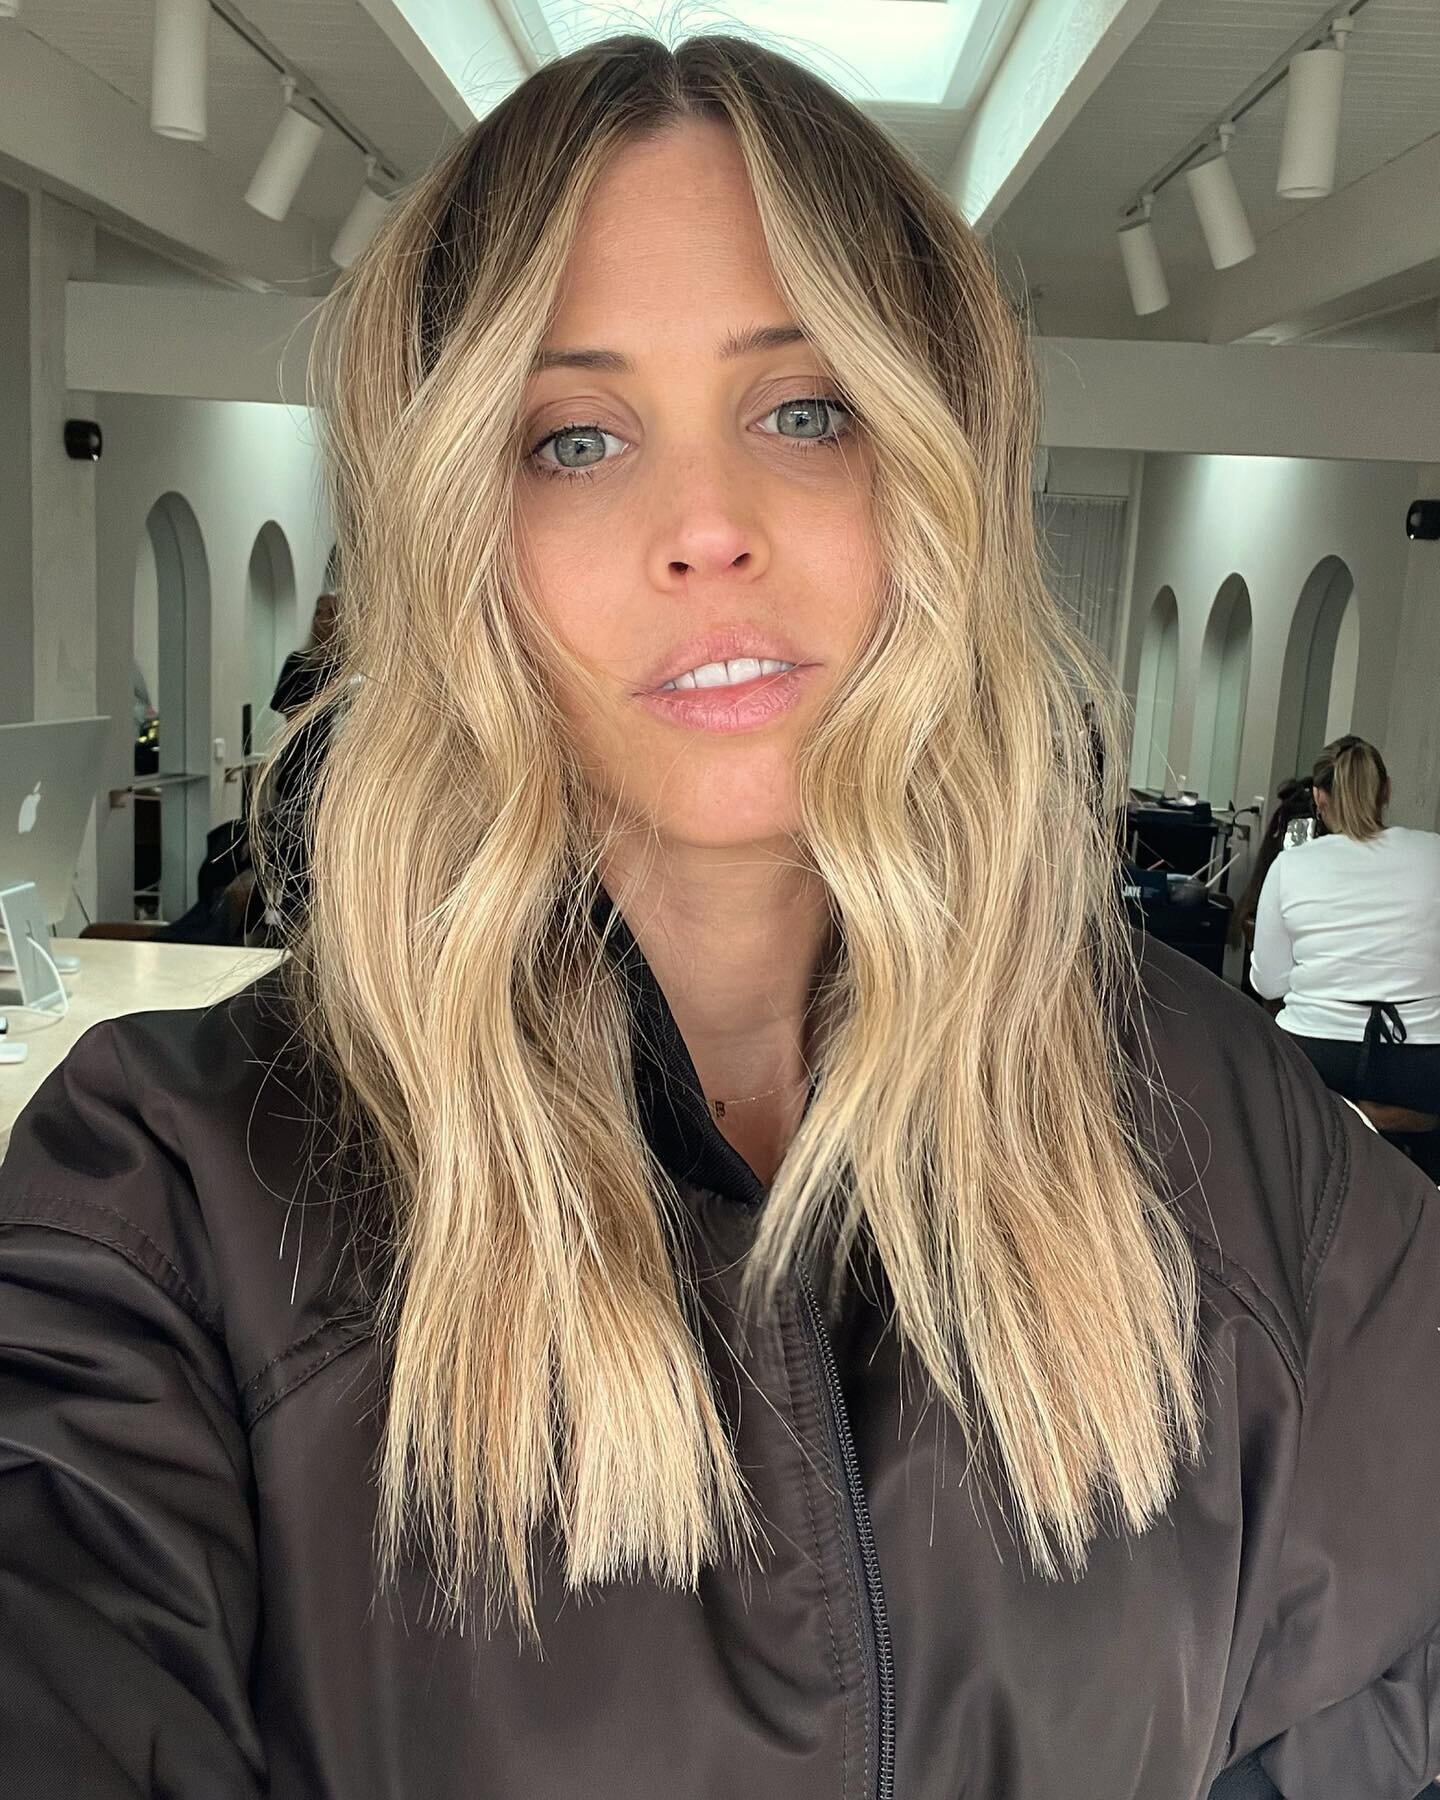 Fresh colour for this blonde baby mumma, just in time for Mother&rsquo;s Day!

FORMULA SHARE!!

Highlights - 20 Vol + 10 Vol (hairline)
Root Shadow - 6WN + 7.0
Global Gloss - 9WN + 9.3 with clear 

😍